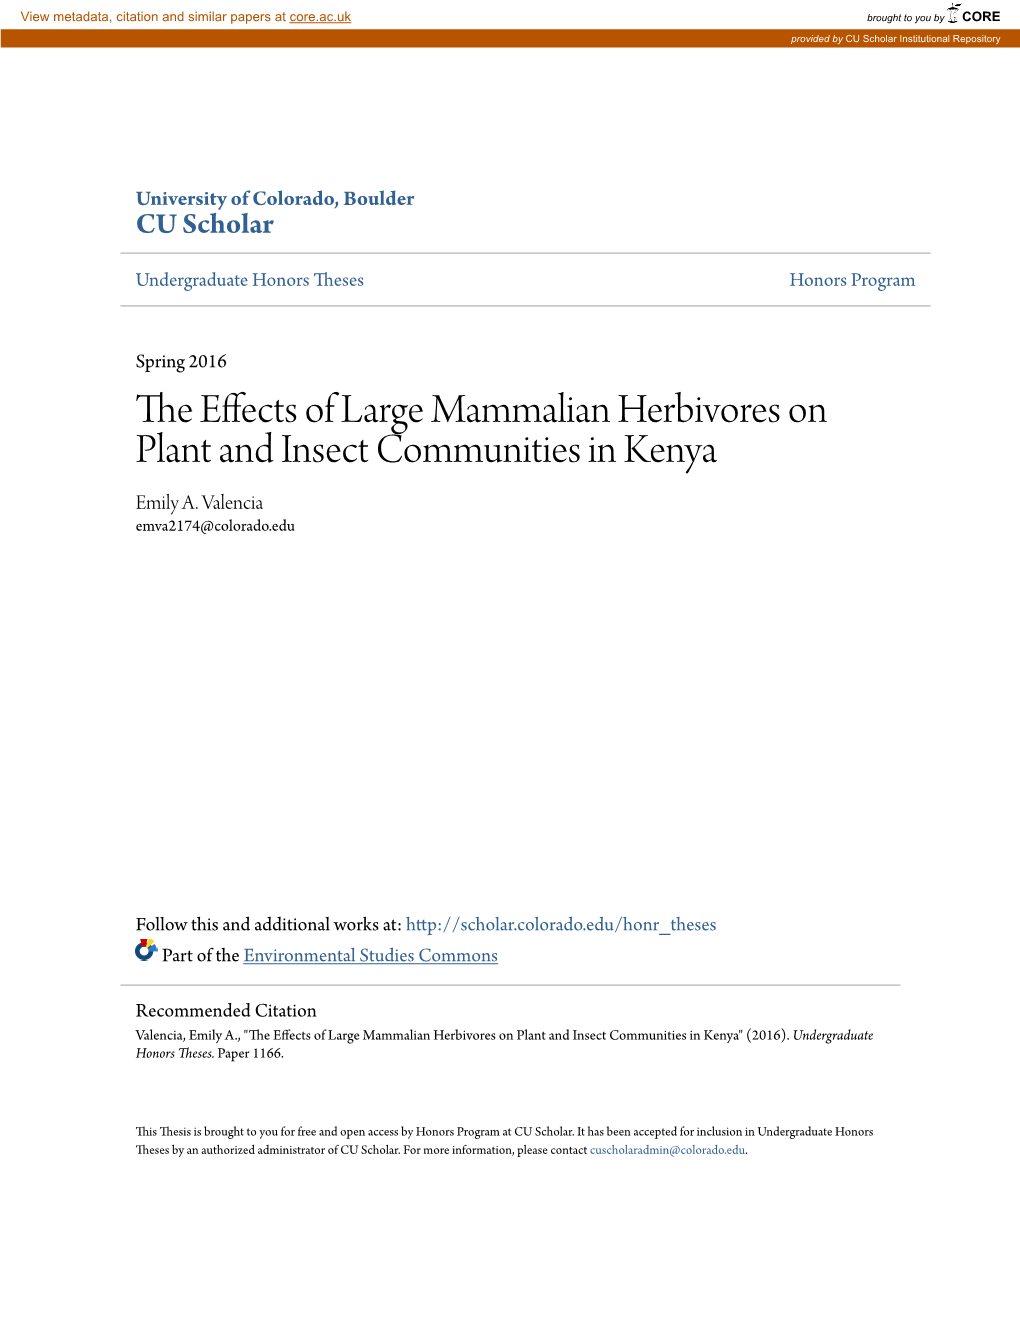 The Effects of Large Mammalian Herbivores on Plant and Insect Communities in Kenya" (2016)